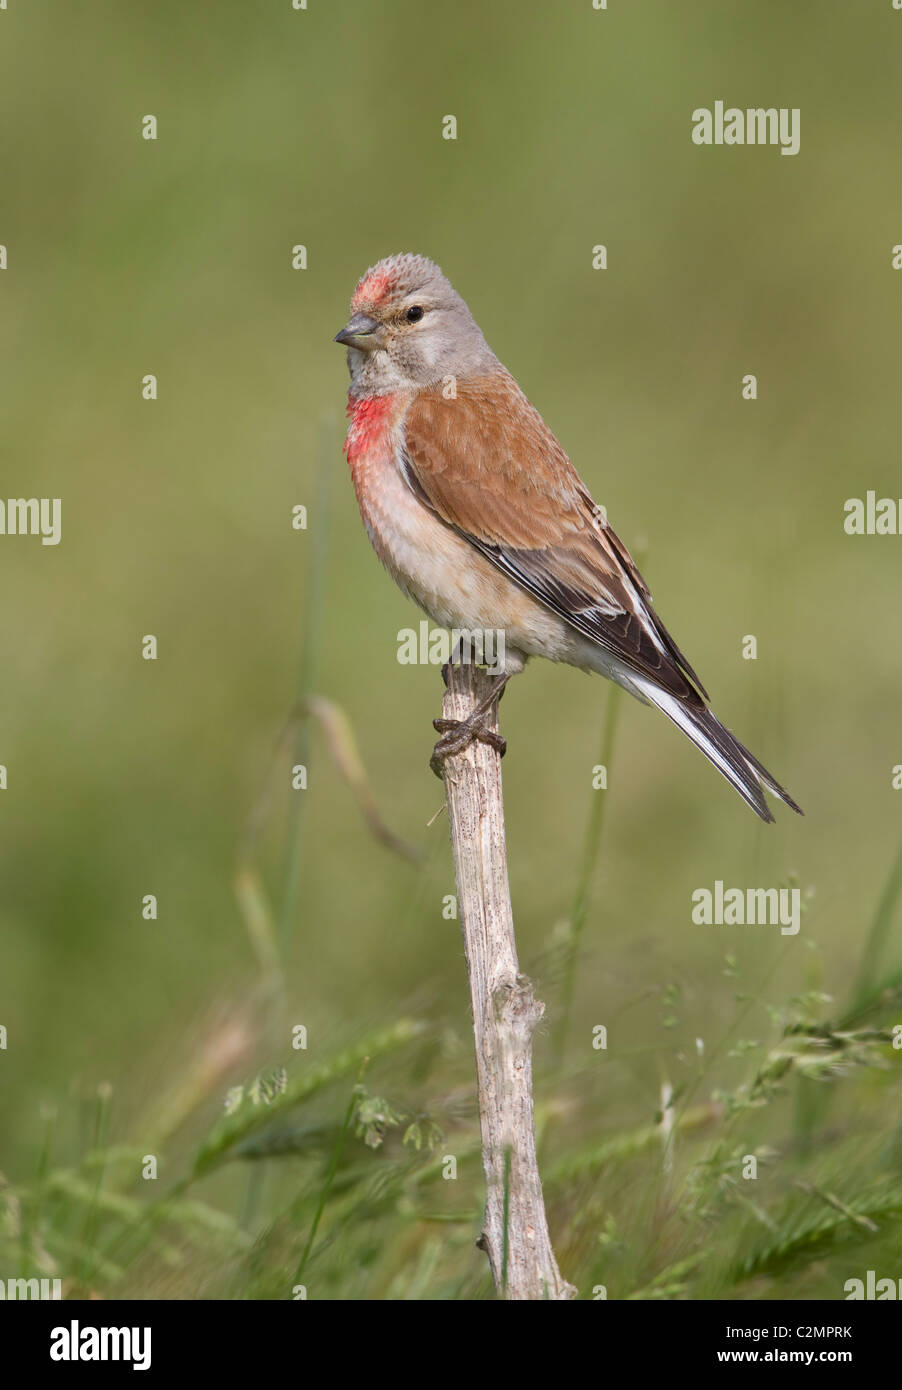 Linnet Carduelis cannabina male coming to drink at pond Stock Photo